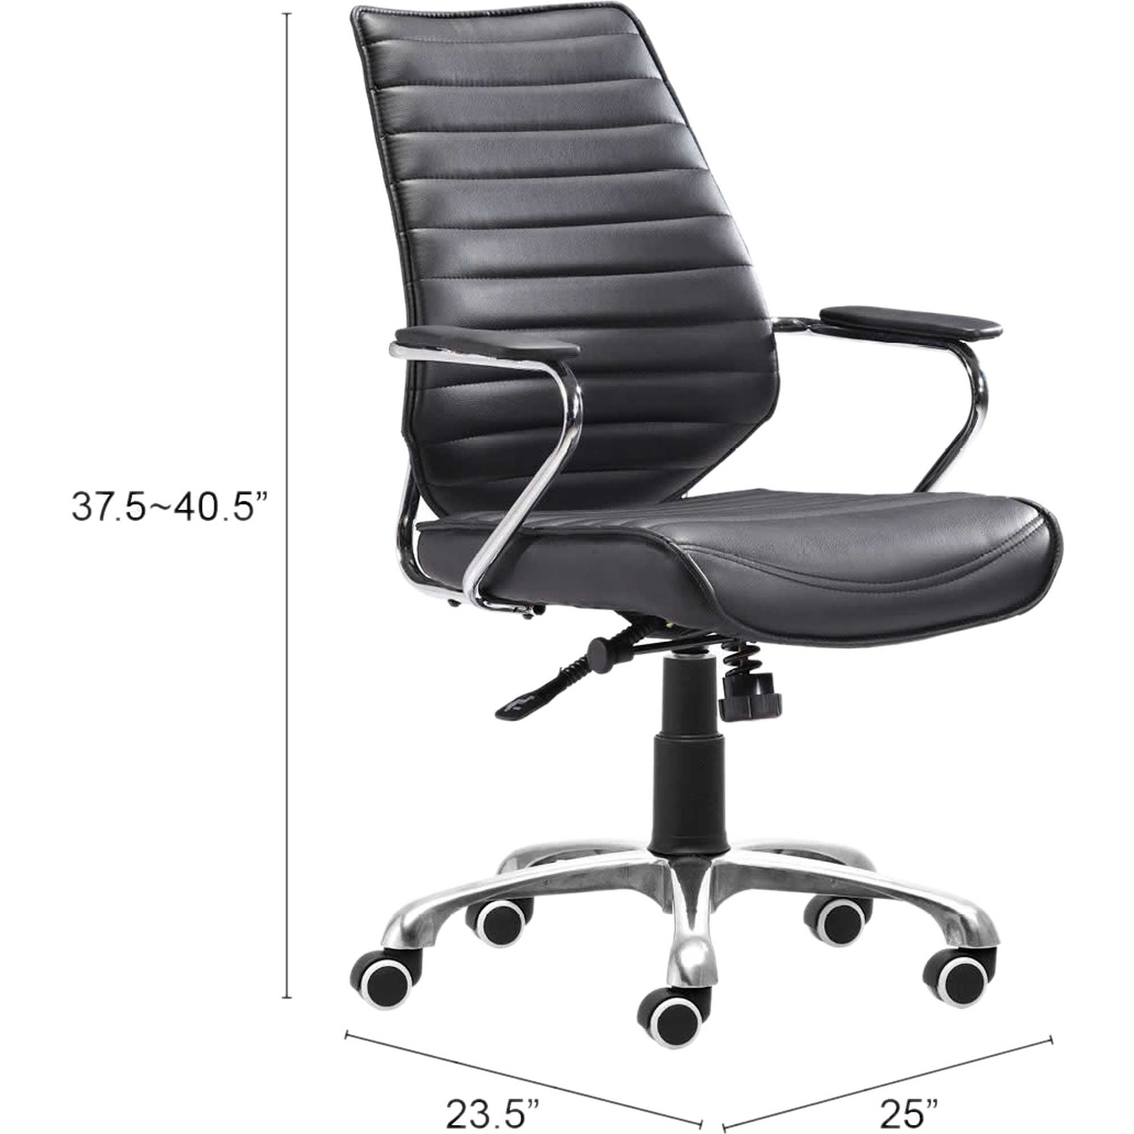 Zuo Modern Enterprise Low Back Office Chair - Image 5 of 7